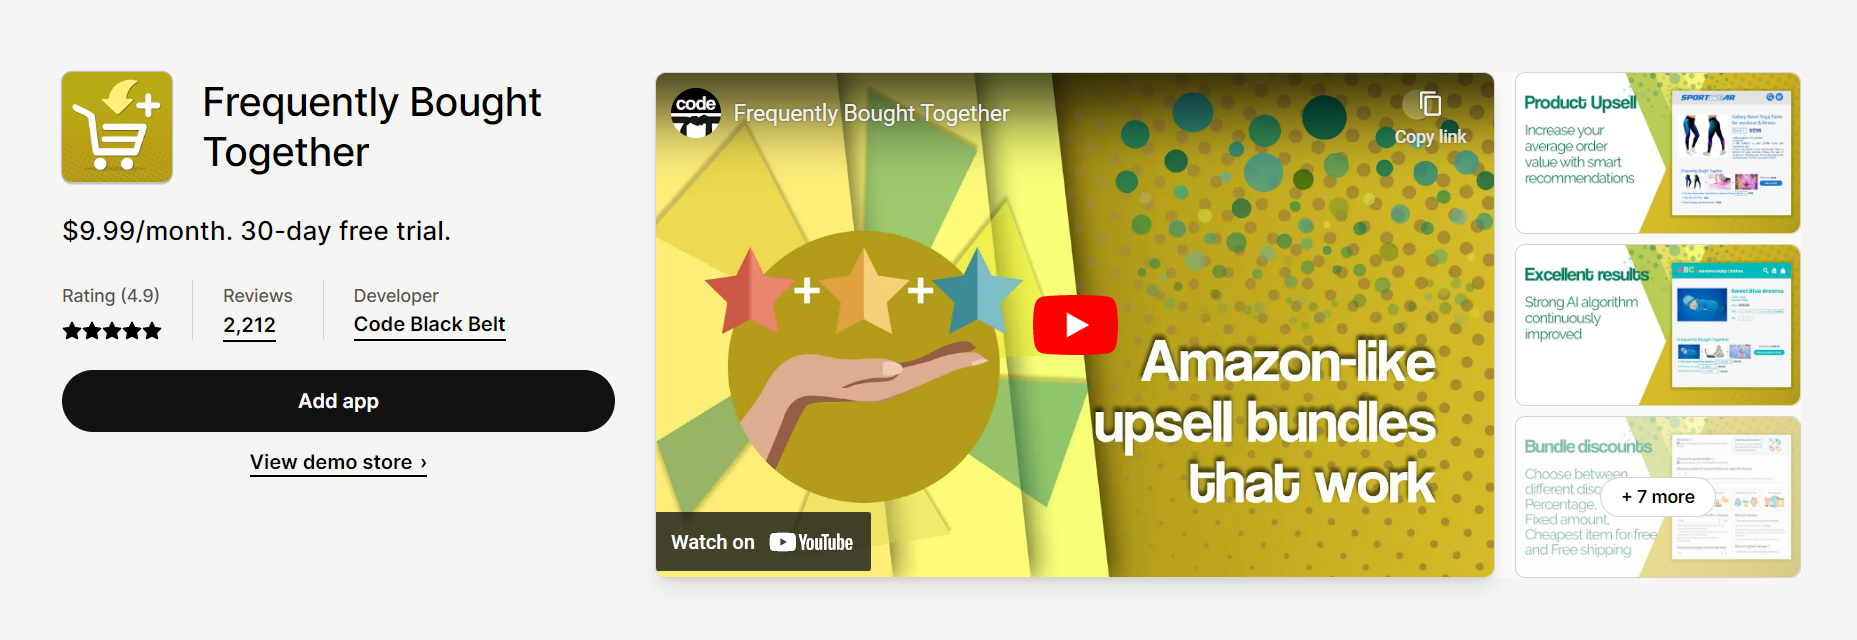 Frequently bought together app